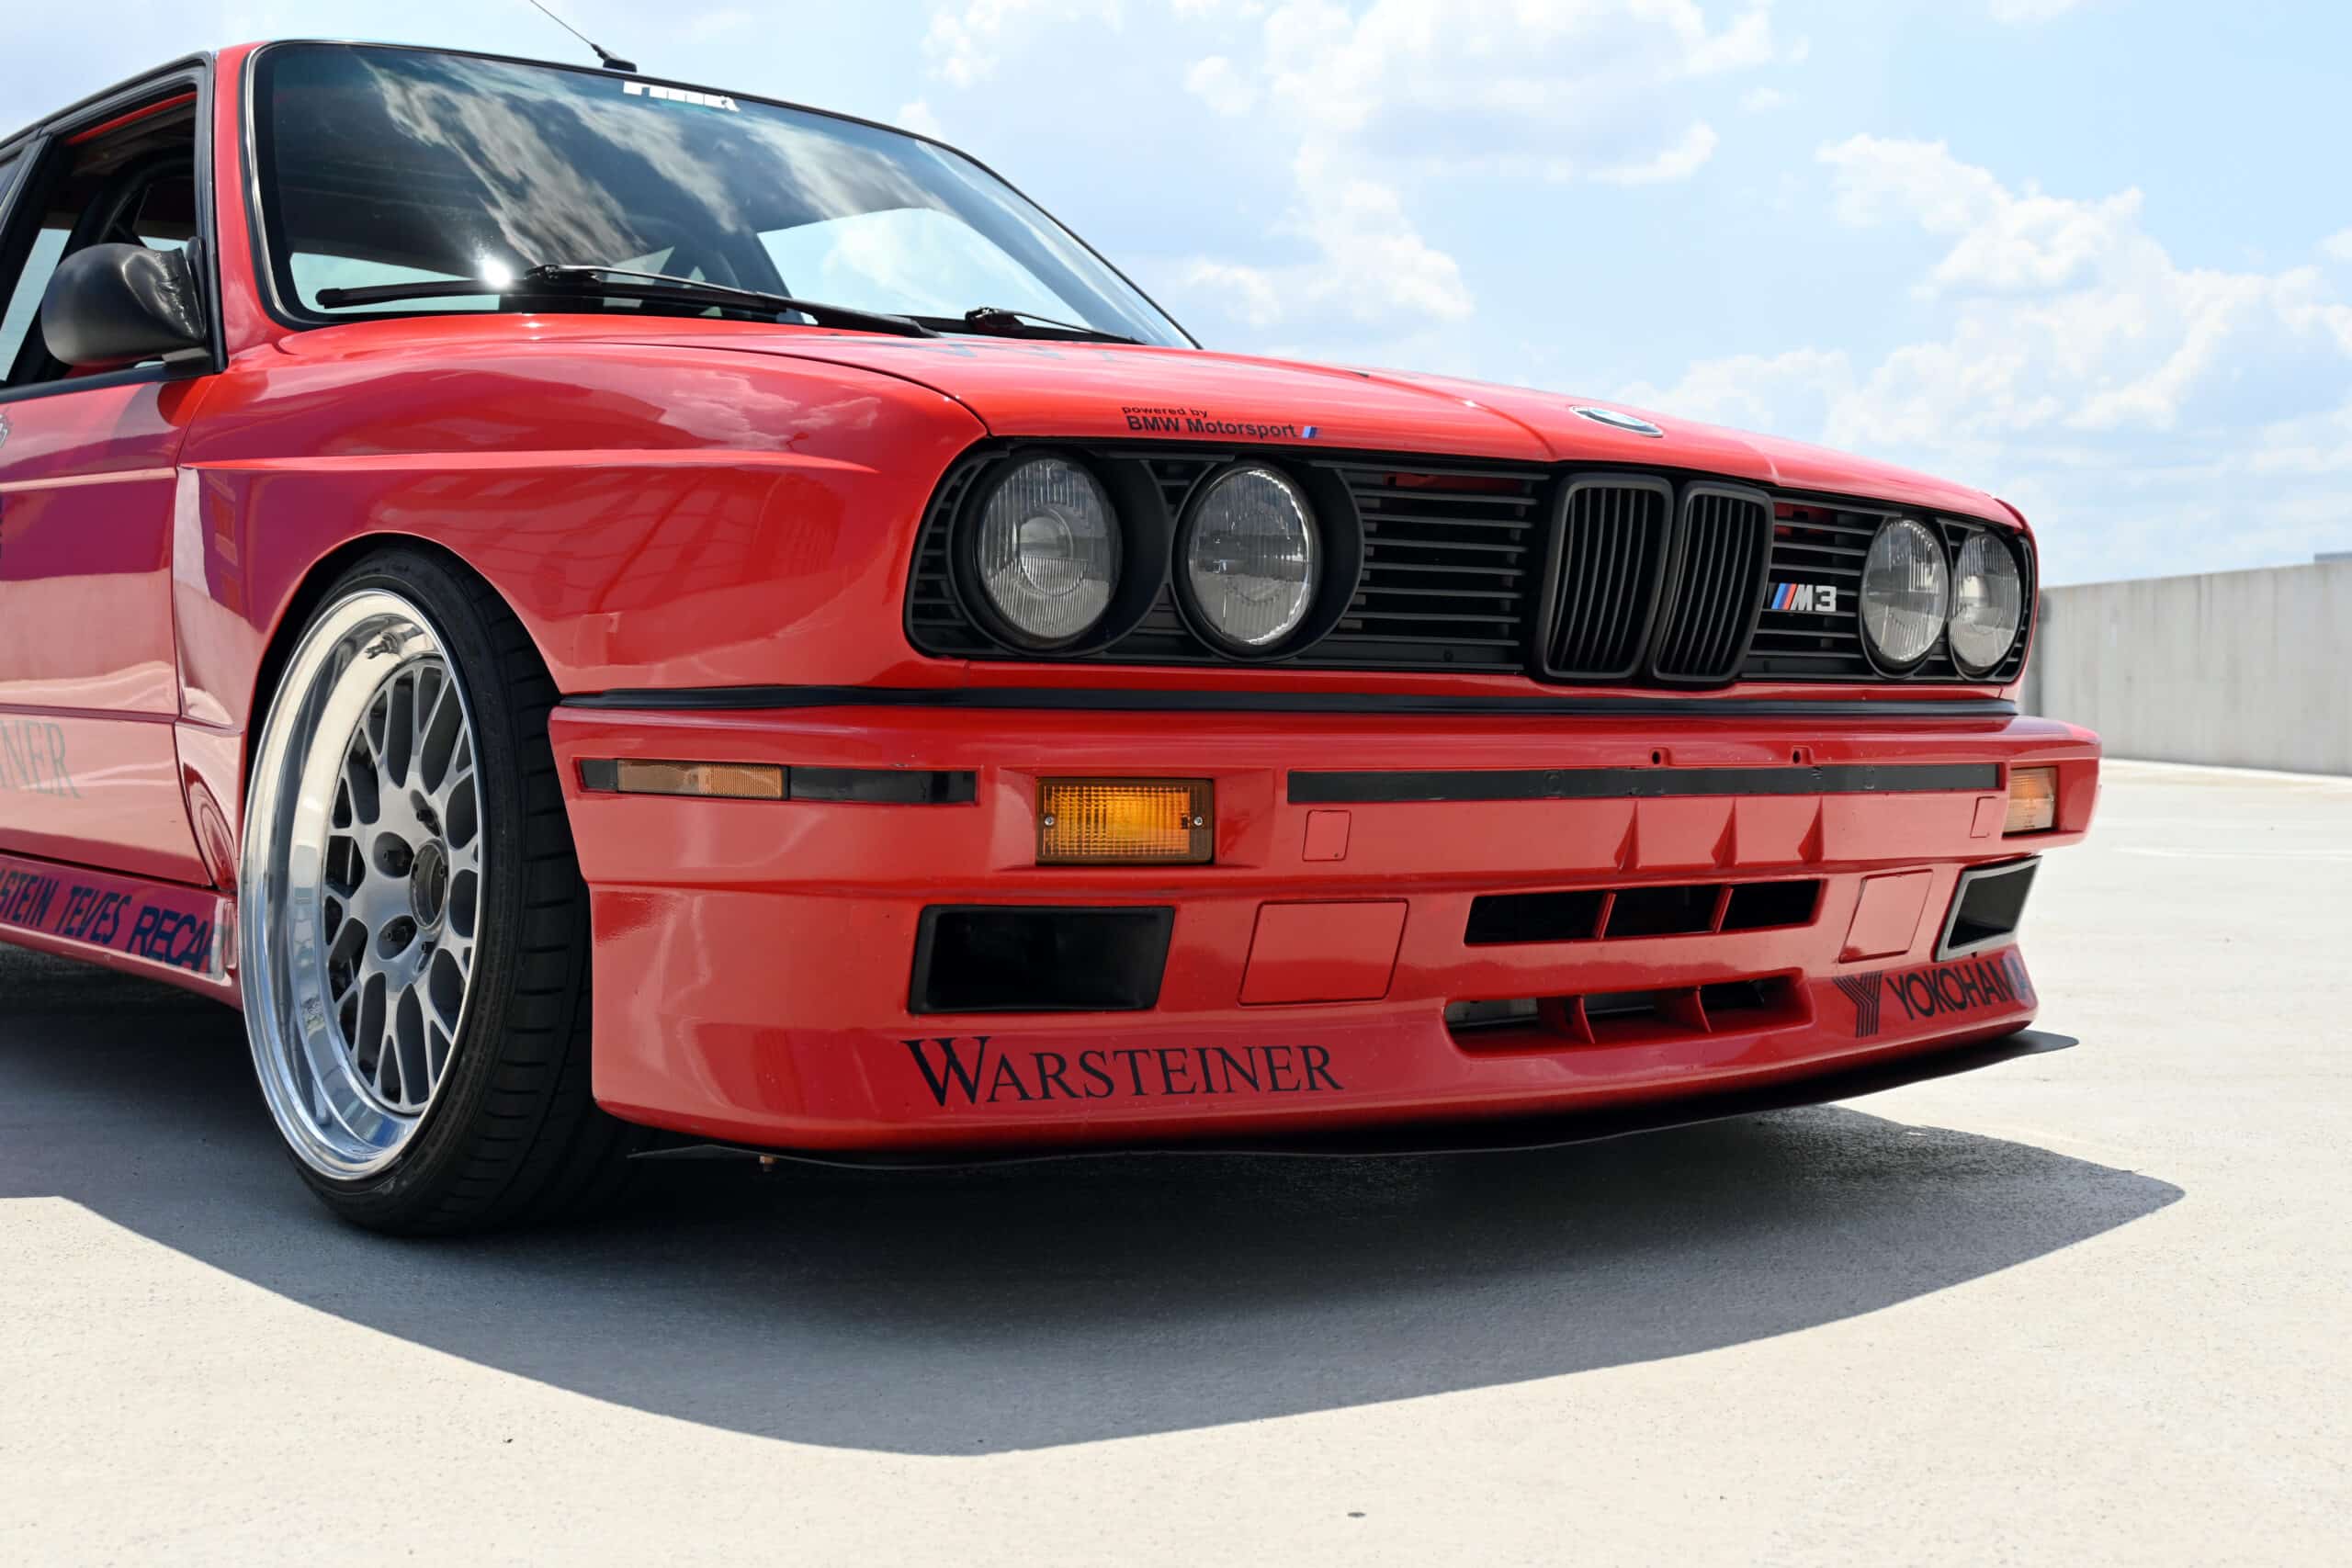 1988 BMW E30 M3 / S50 Swapped / Track ready street car / comprehensive built / DTM inspired Warsteiner livery / One of 304 US Hennarot M3s